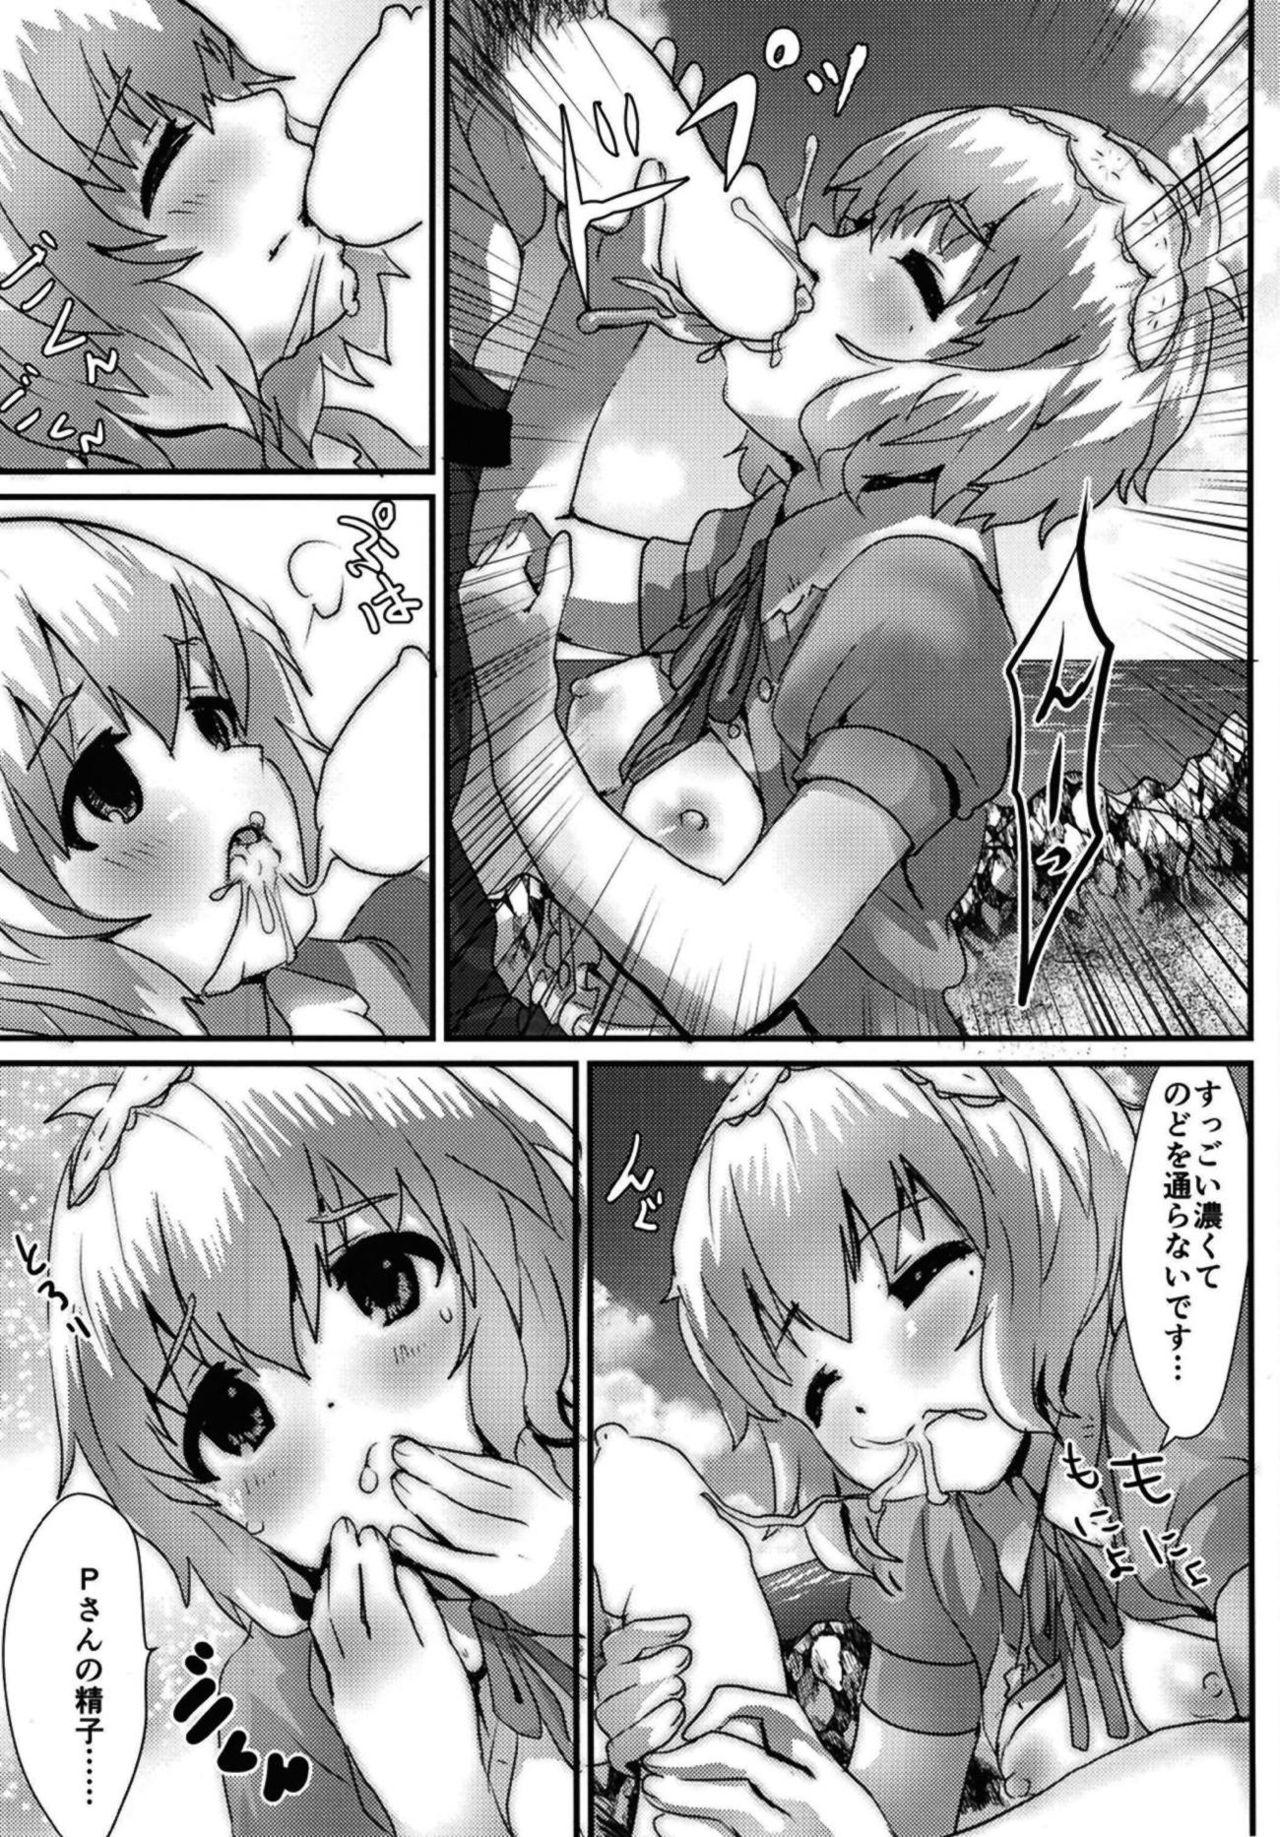 Real Orgasms ゆめだっつってんだろ！！！ - The idolmaster Village - Page 10